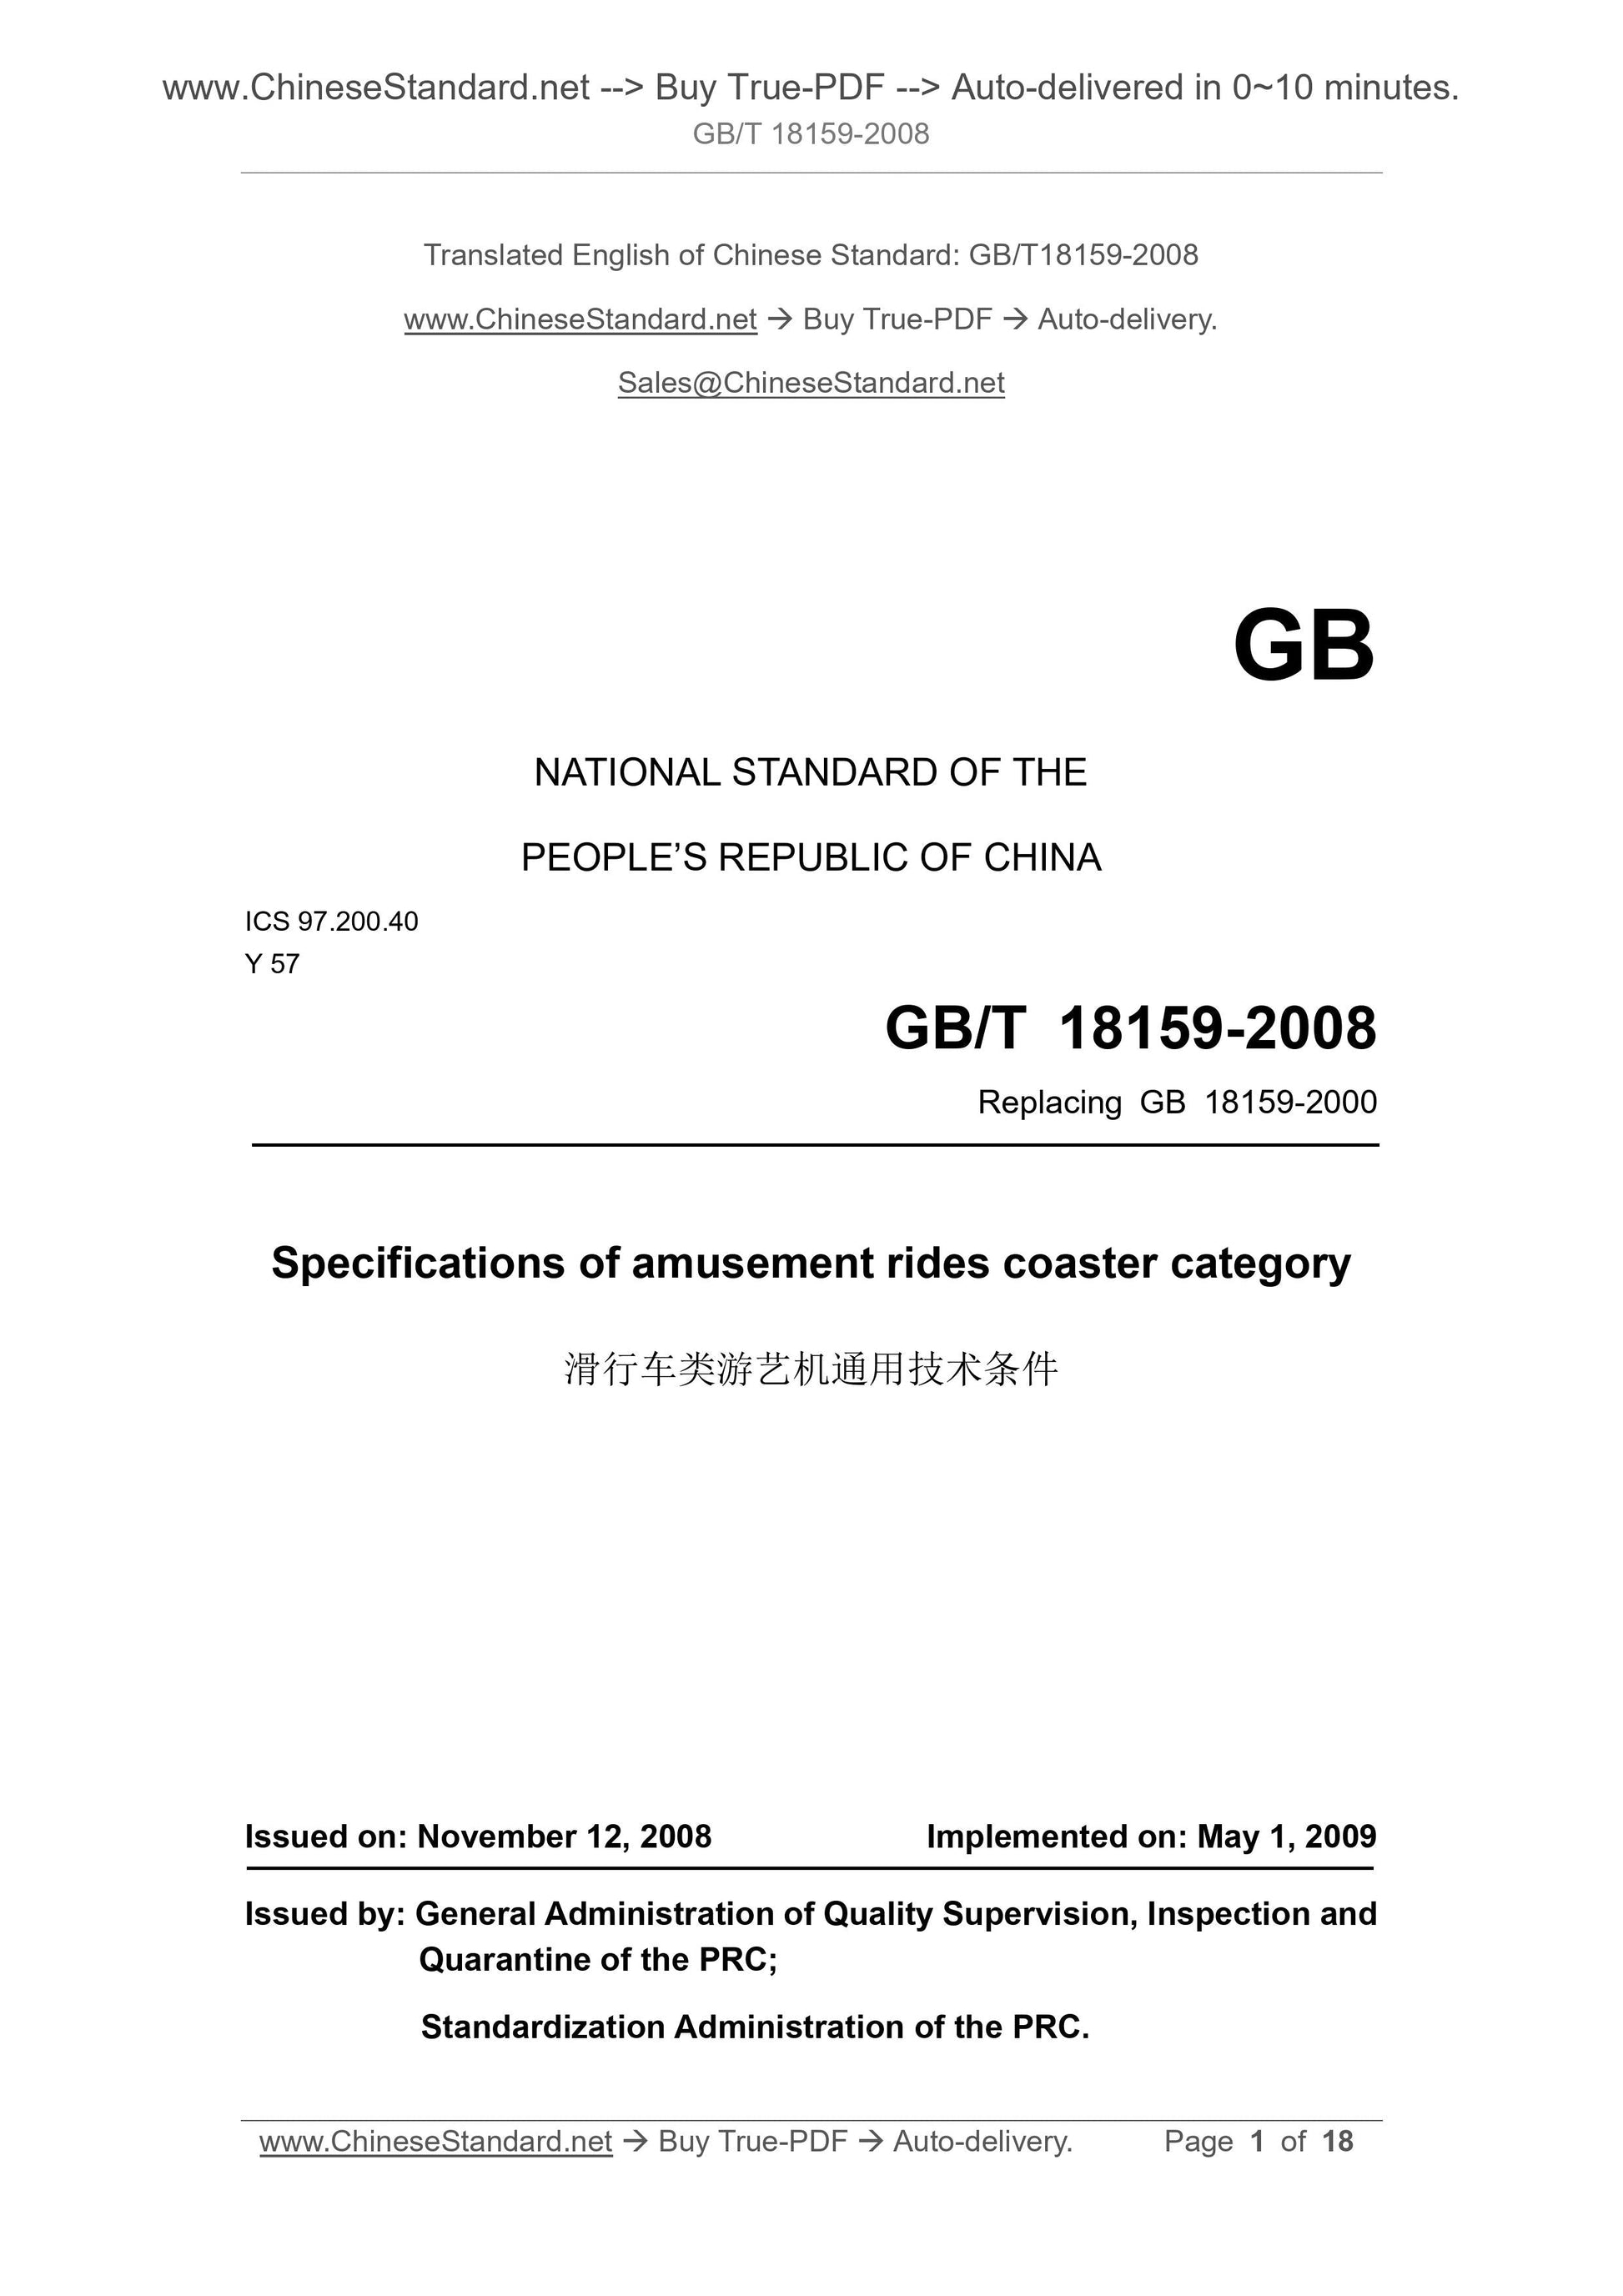 GB/T 18159-2008 Page 1